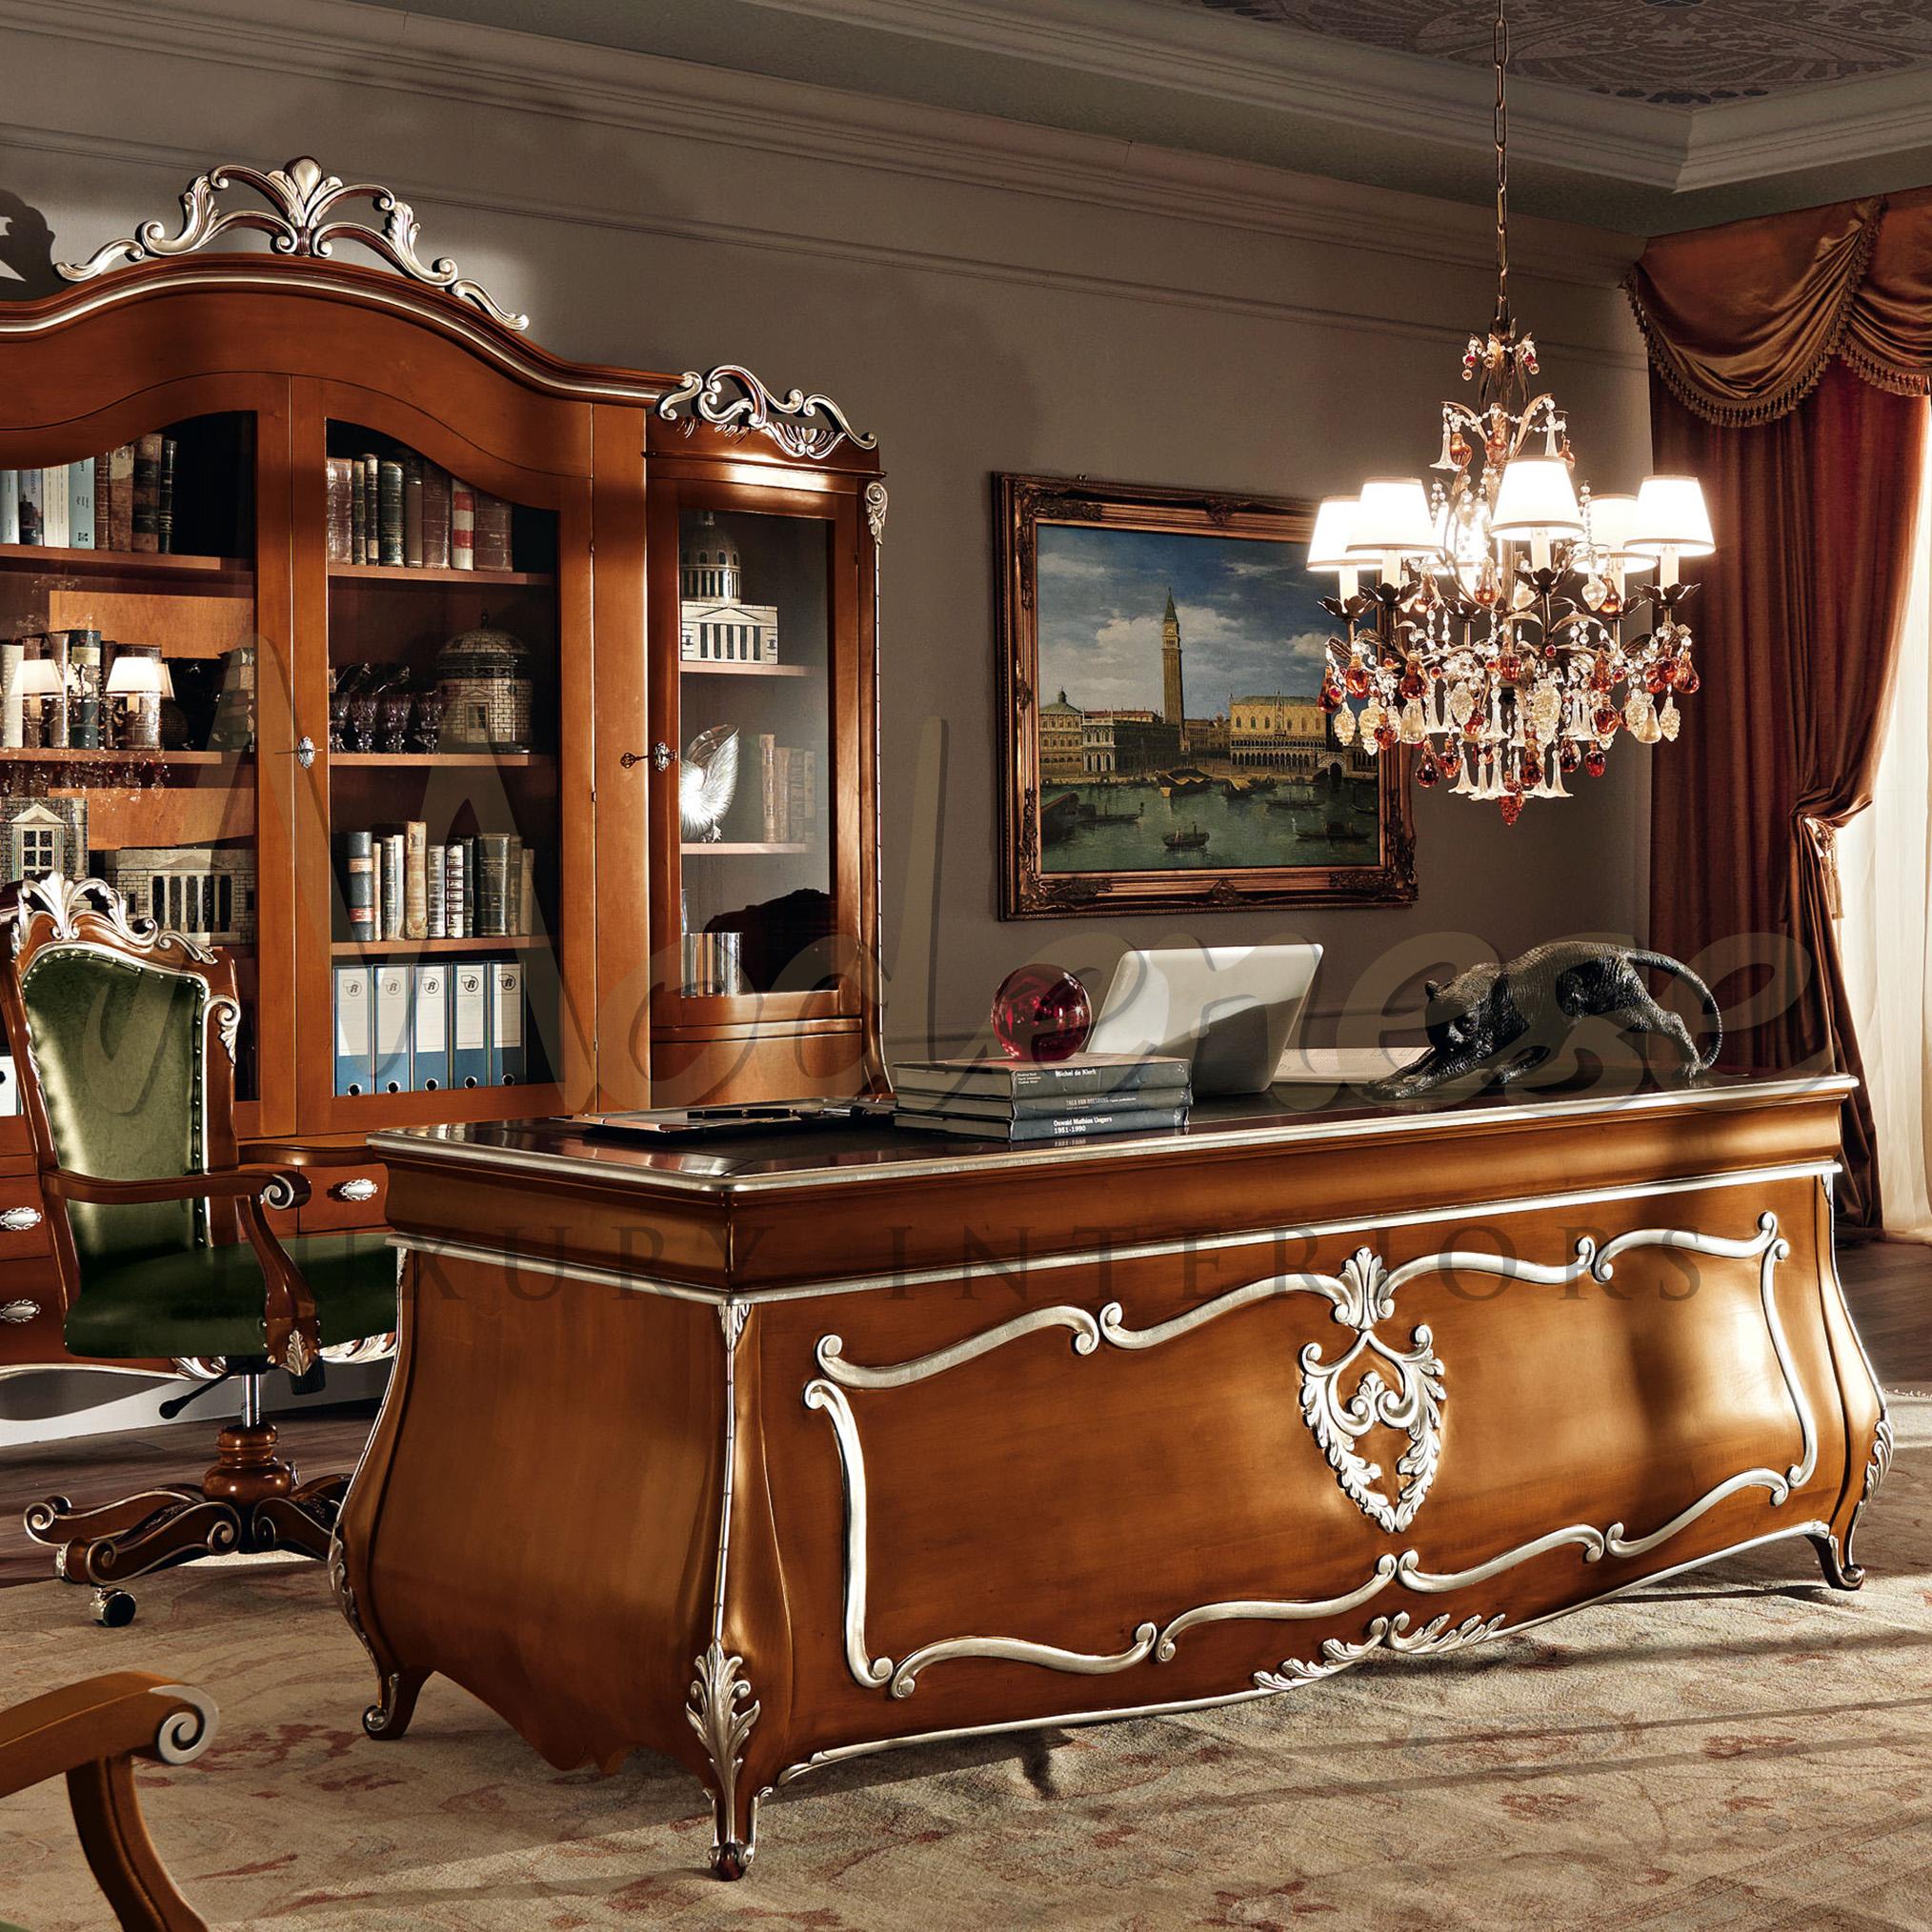 Admire this domed presidential office desk finely finished in natural walnut and silver leaf decorated carvings. Its curved baroque legs really make a statement, and the real italian green leather on the upper surface is perfect when paired with the